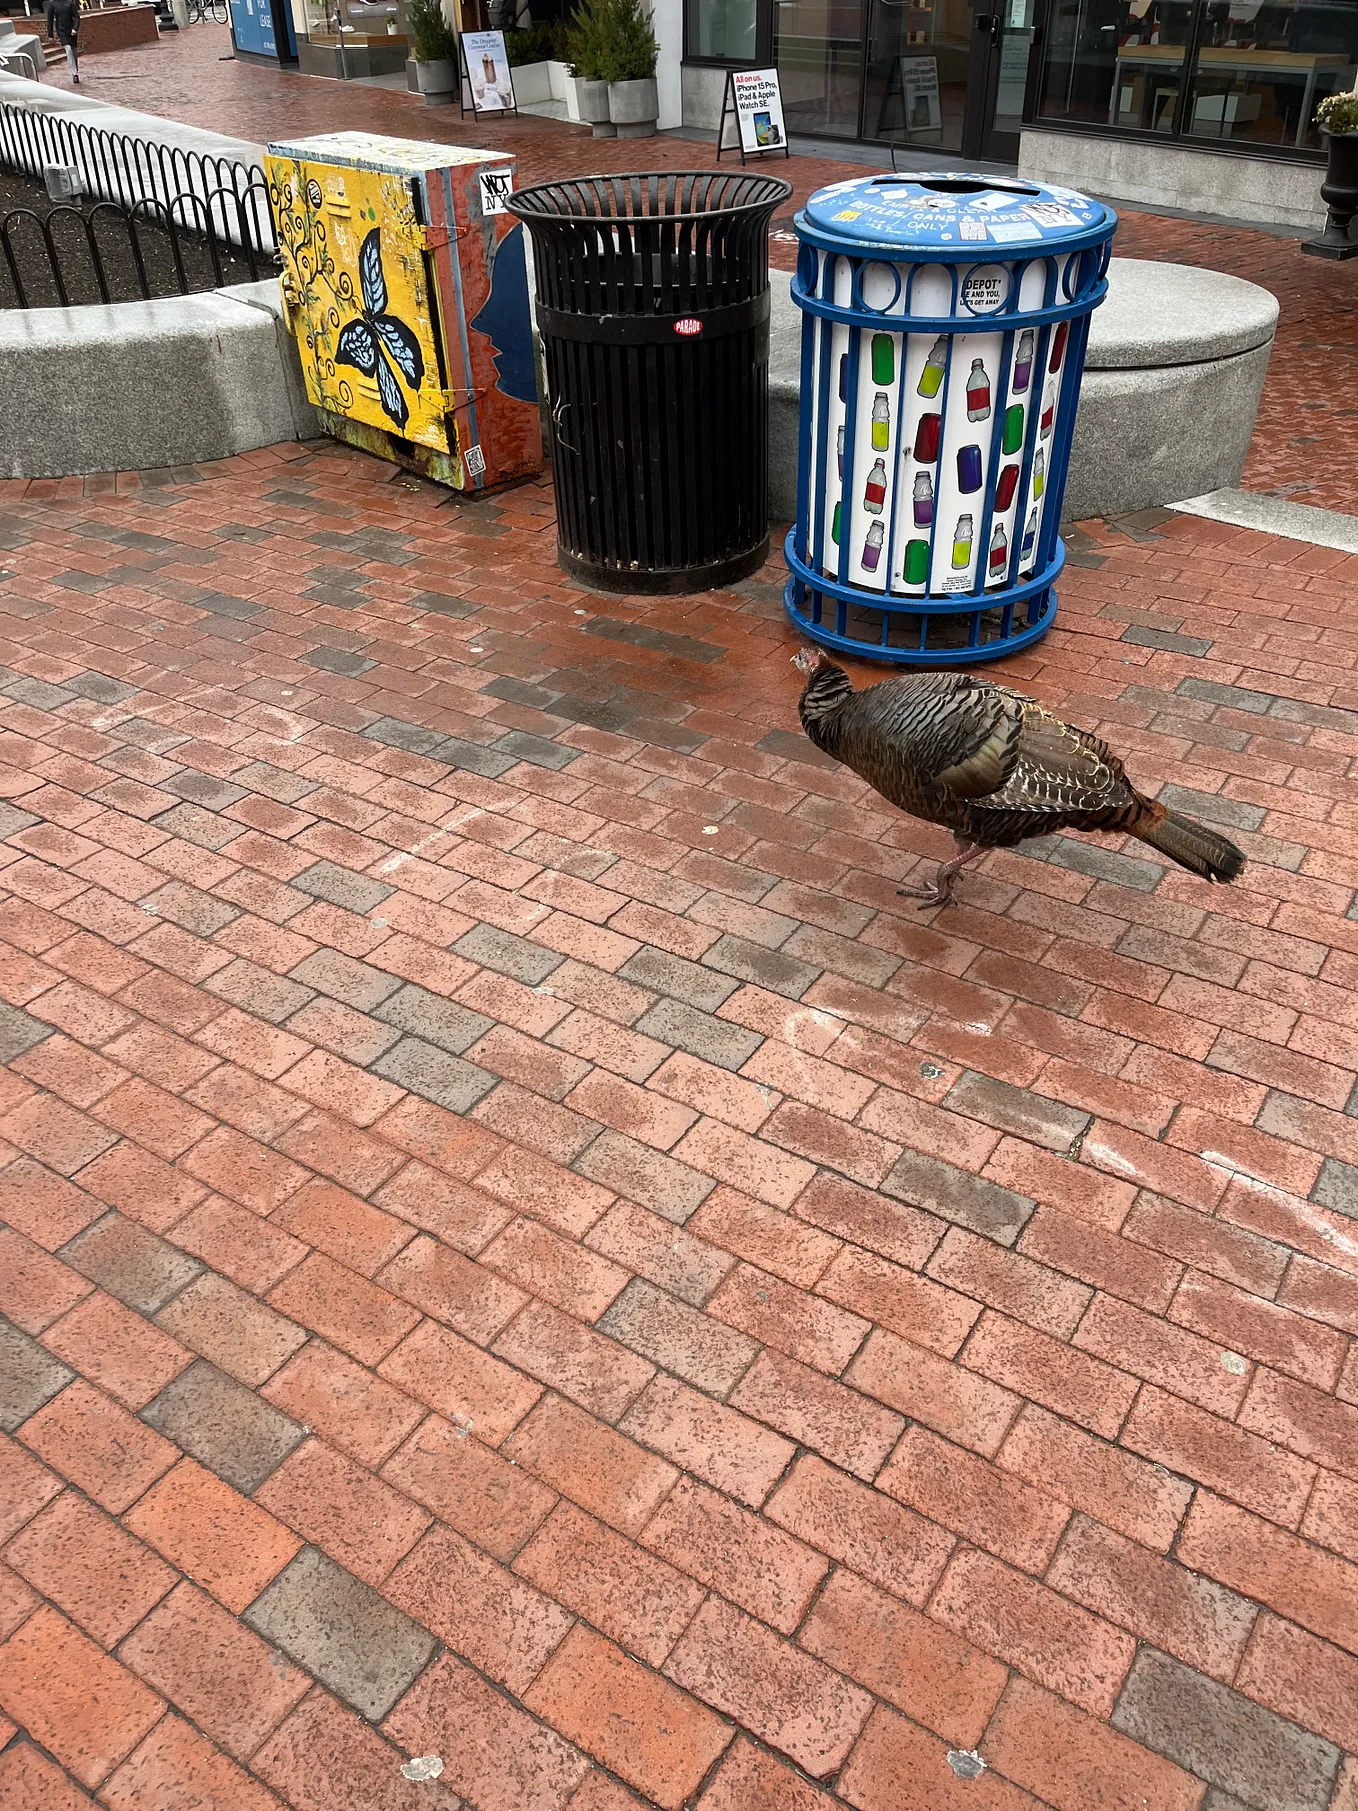 There are Turkeys at Harvard